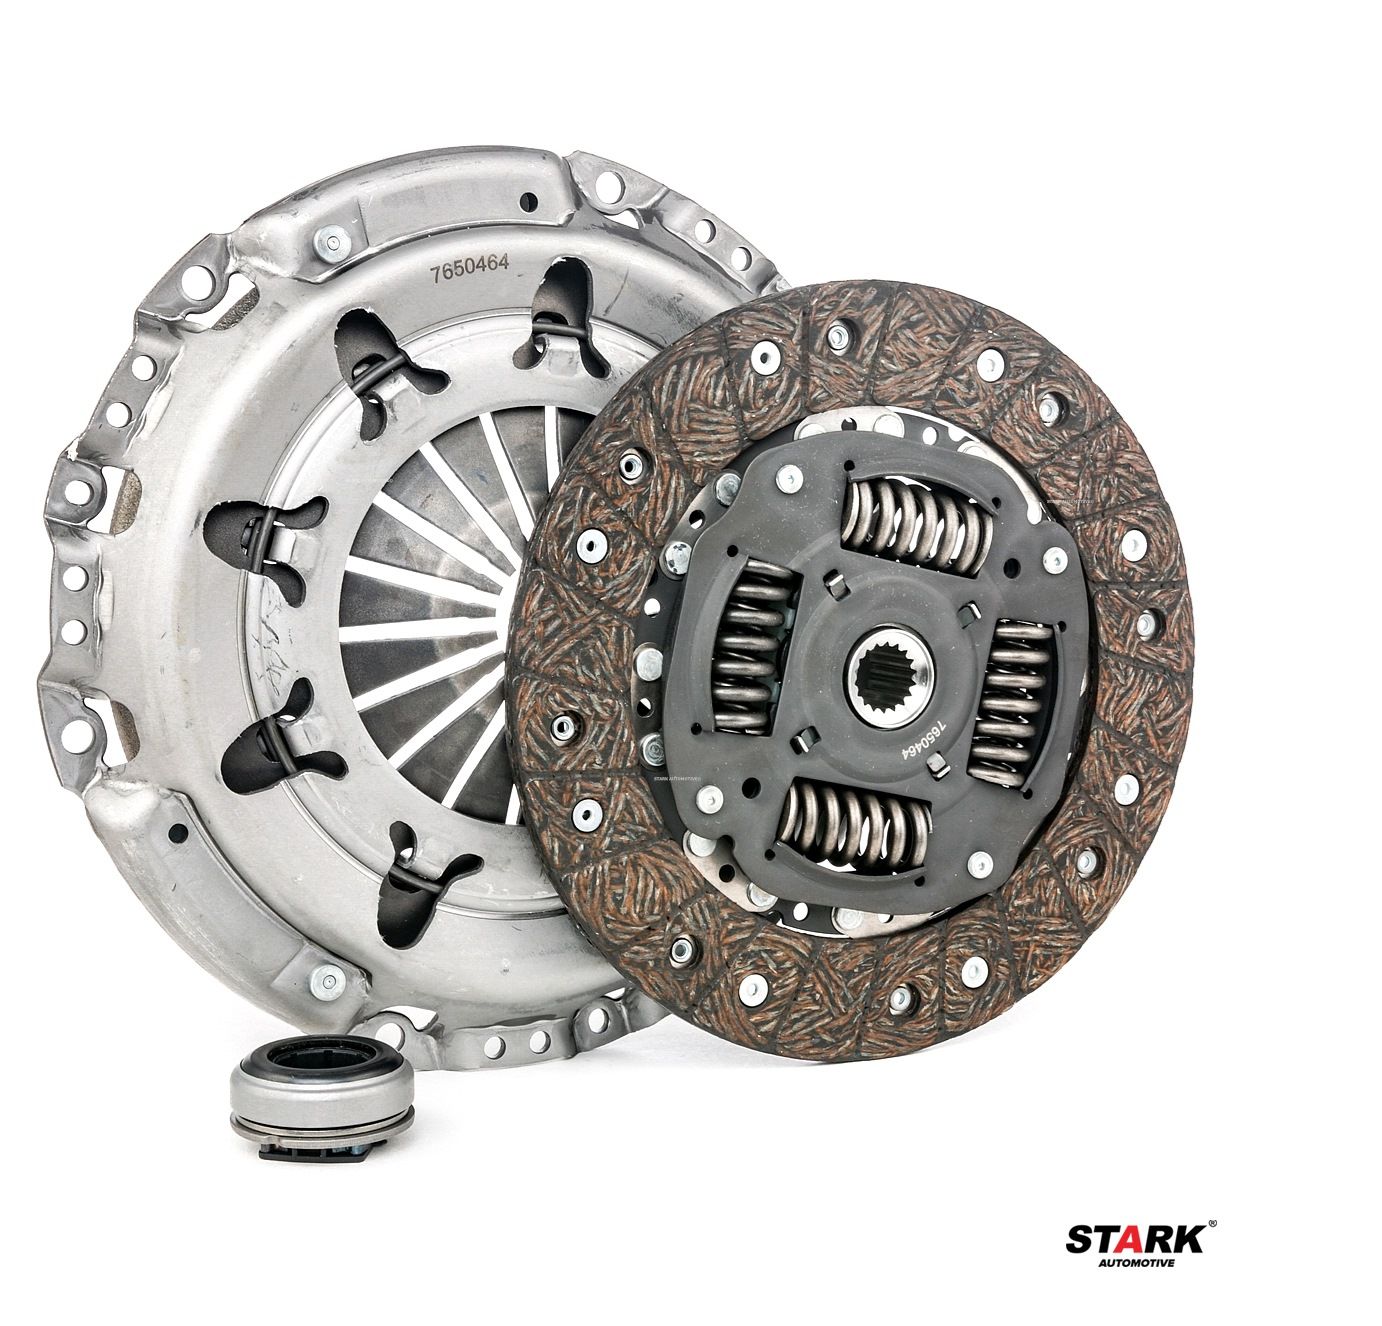 STARK SKCK-0100003 Clutch kit three-piece, with clutch release bearing, with clutch disc, without flywheel, 228mm